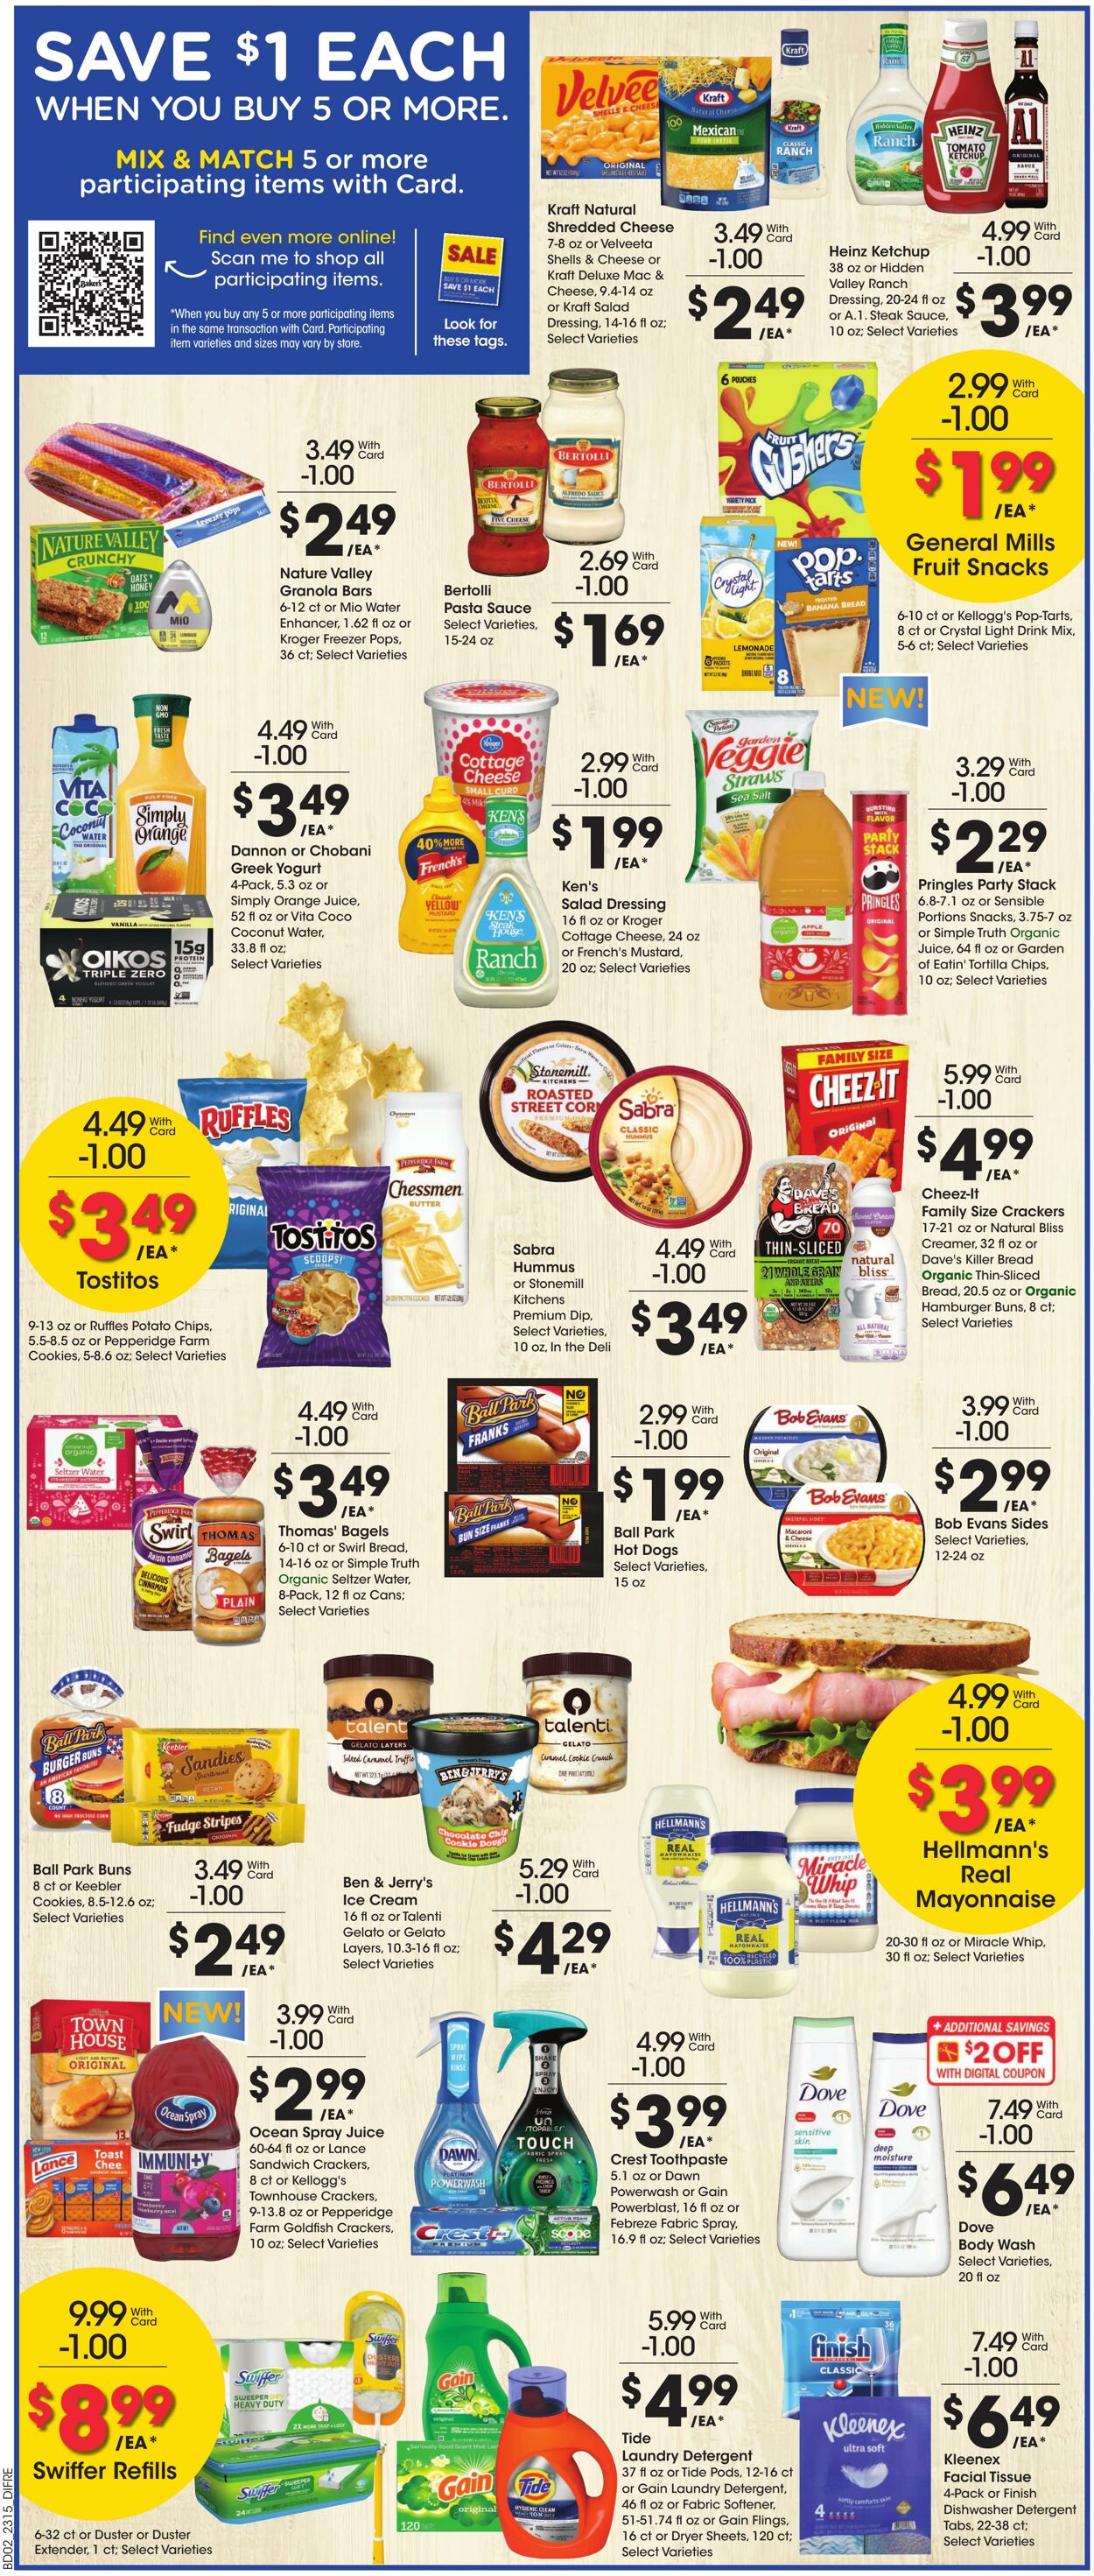 Weekly ad Baker's 05/10/2023 - 05/16/2023